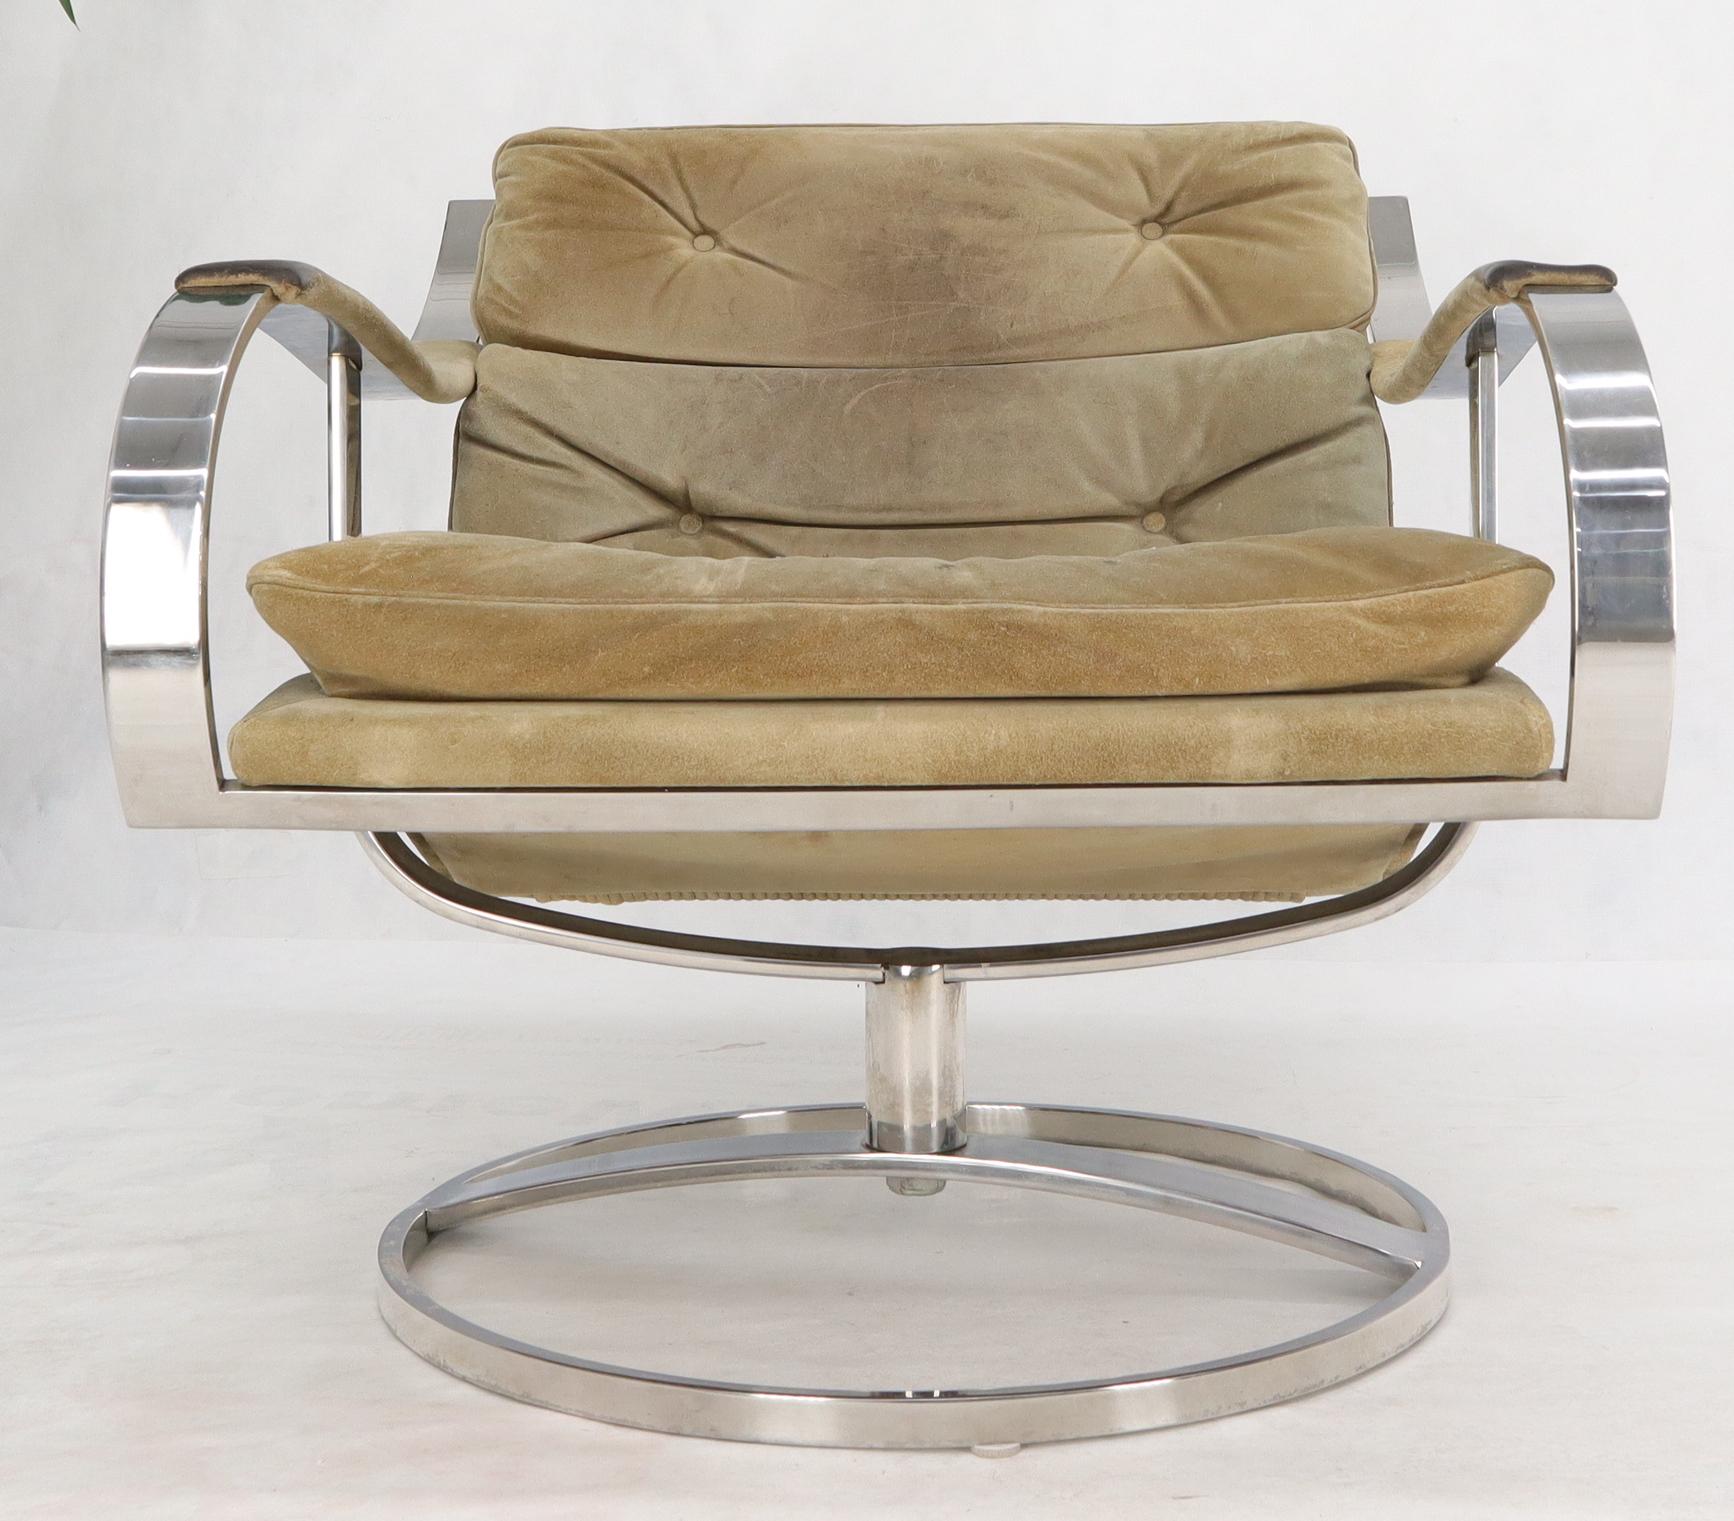 Heavy Gage Polished Stainless Steel Swivel Base Suede Upholstery Lounge Chair In Fair Condition For Sale In Rockaway, NJ